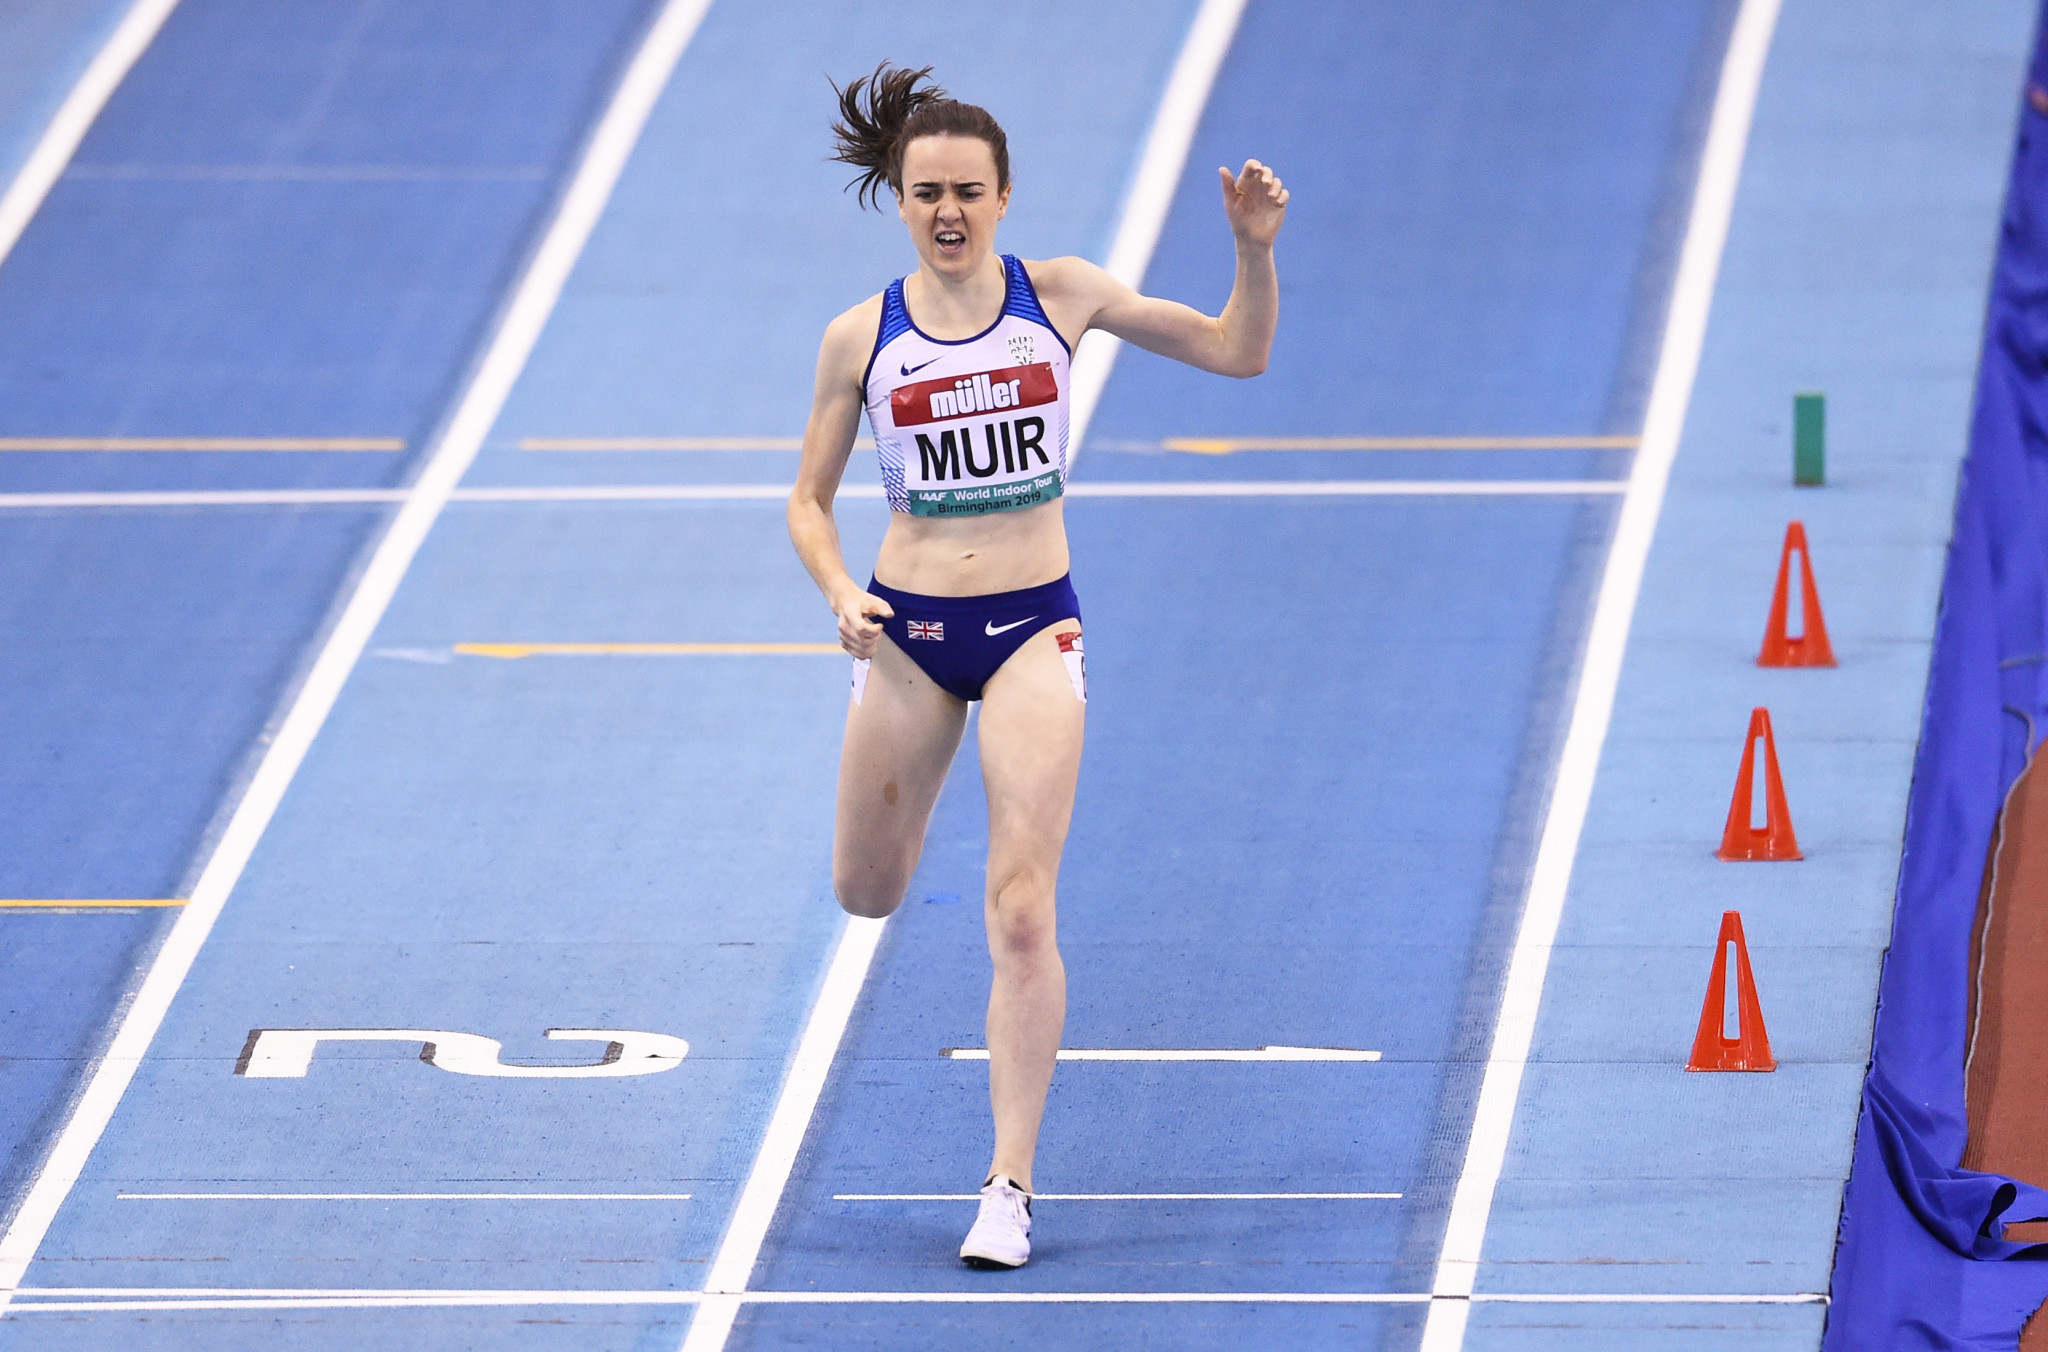 Laura Muir set a British indoor record in the women's mile ©Getty Images